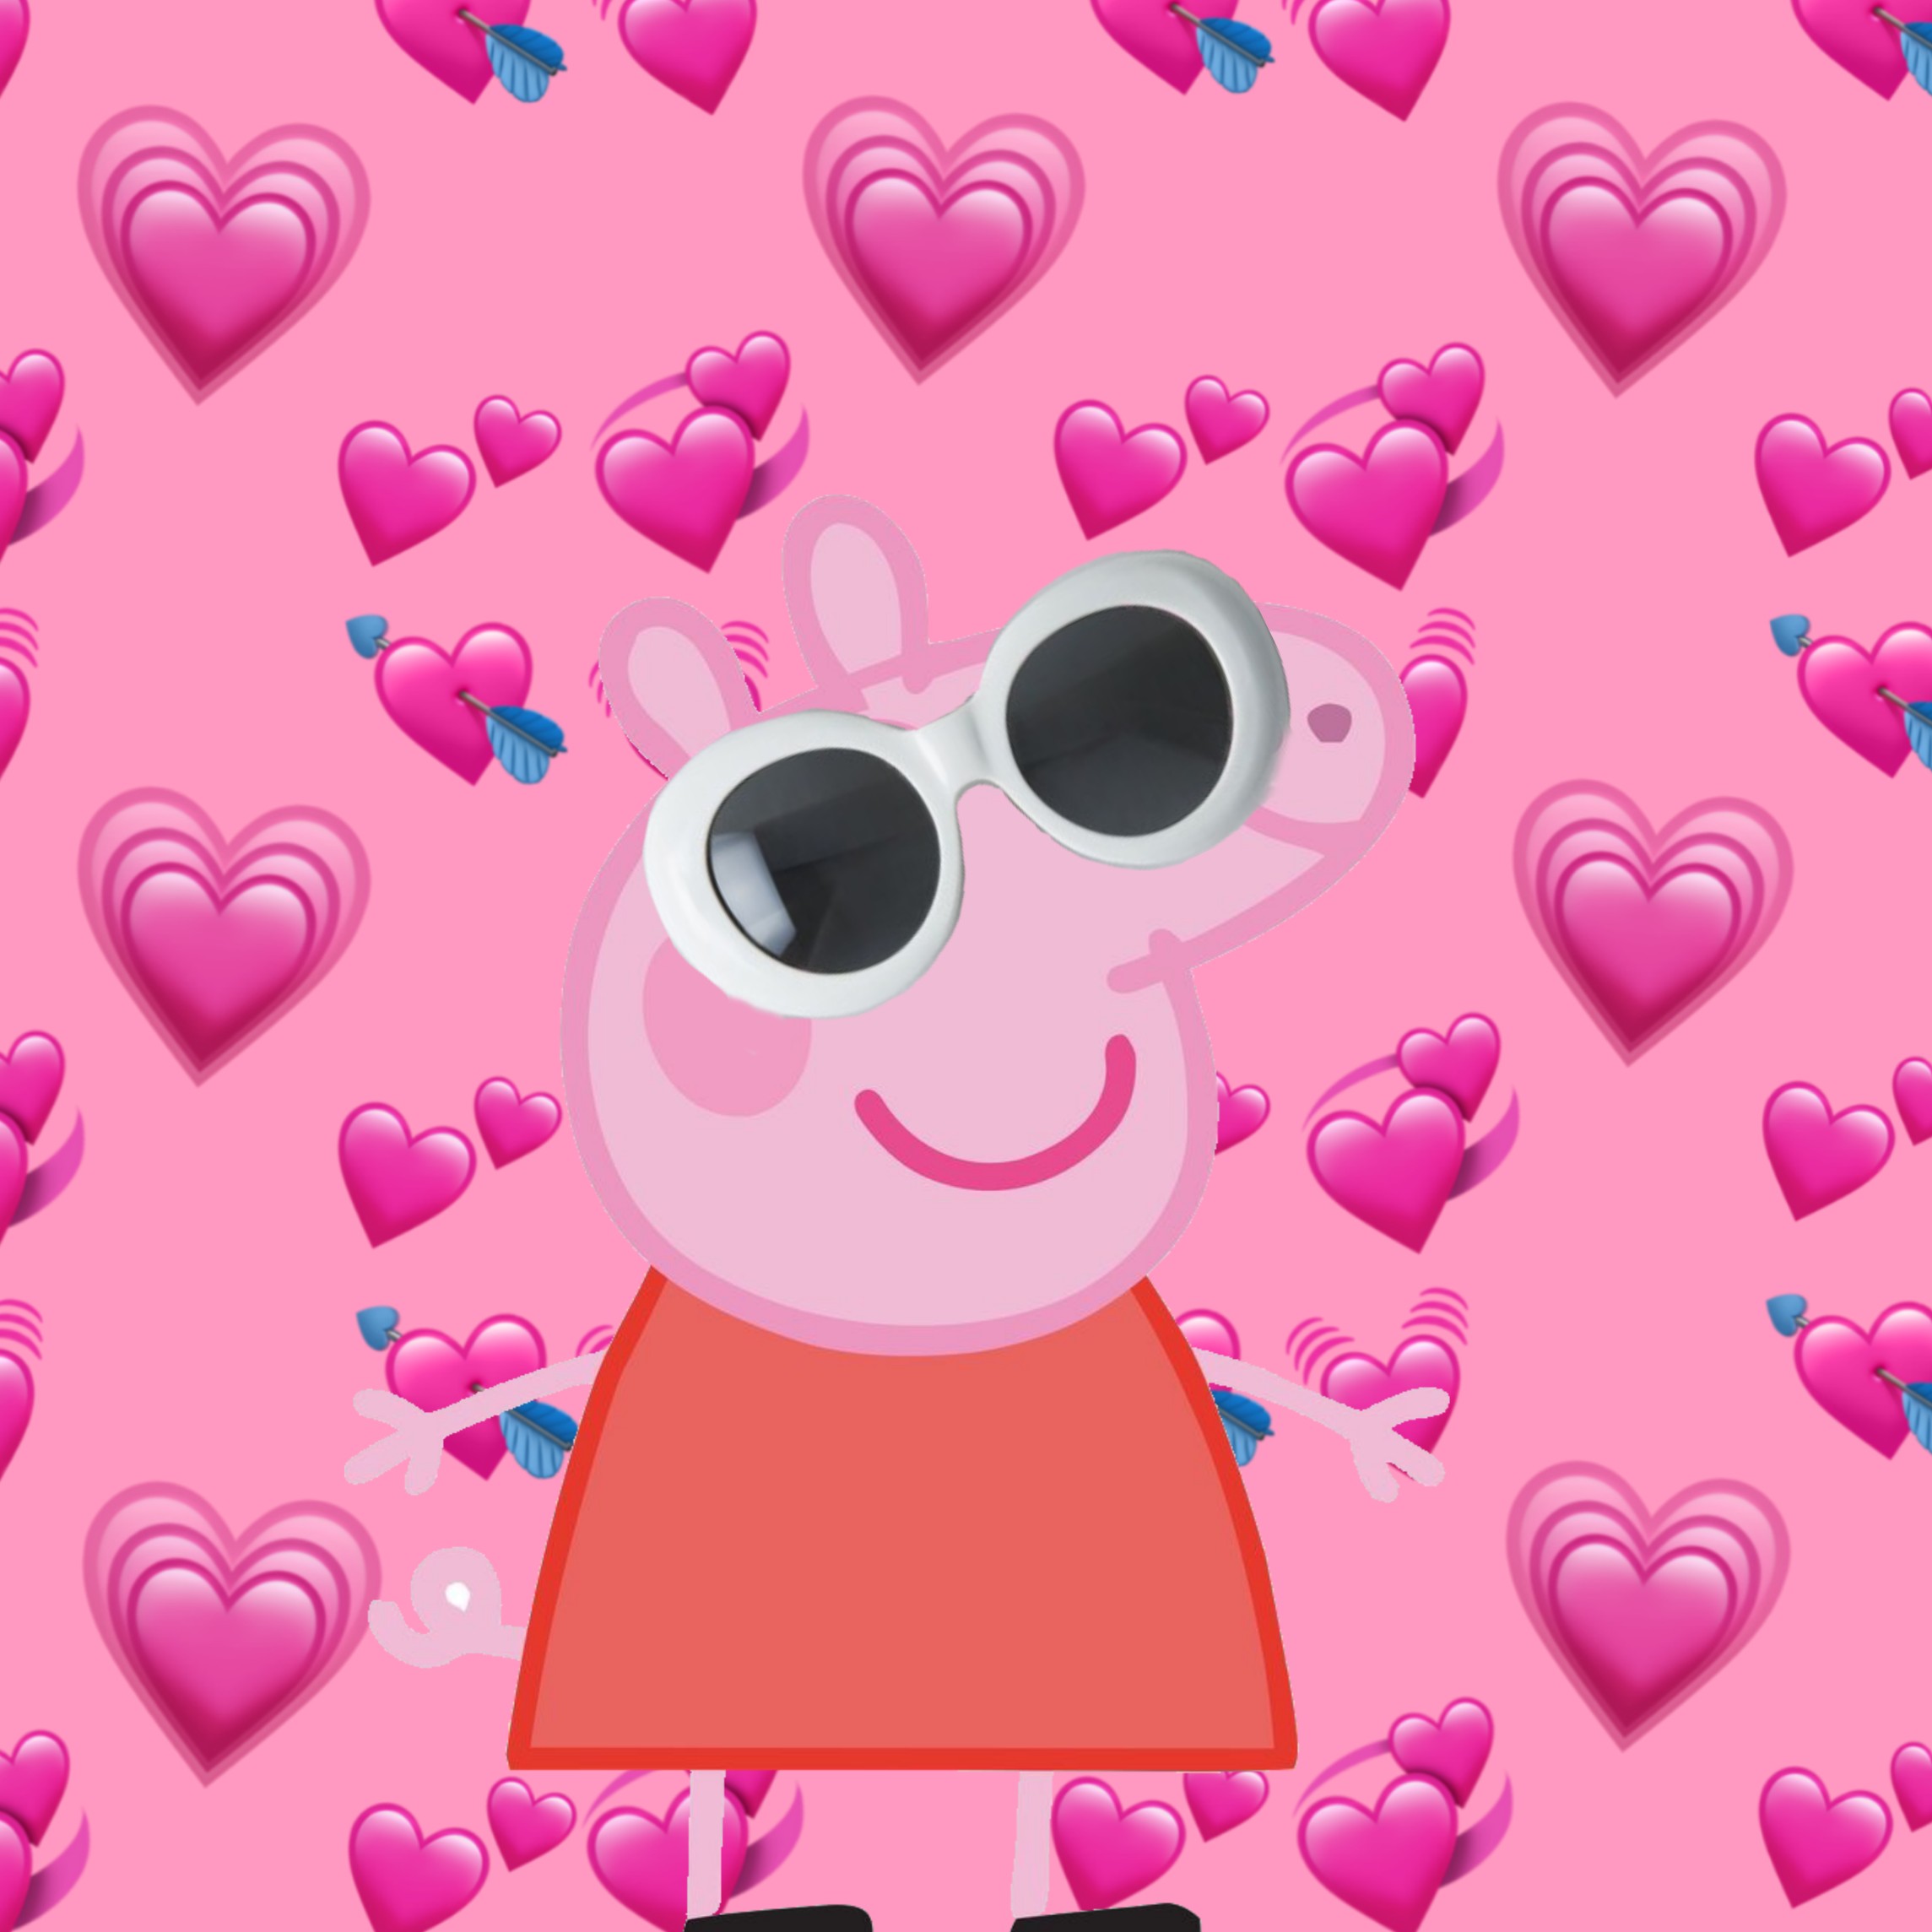 Peppapig Peppa Pig Aesthetic Image By Ghostboyswag Discover all images by yeet beat. peppapig peppa pig aesthetic image by